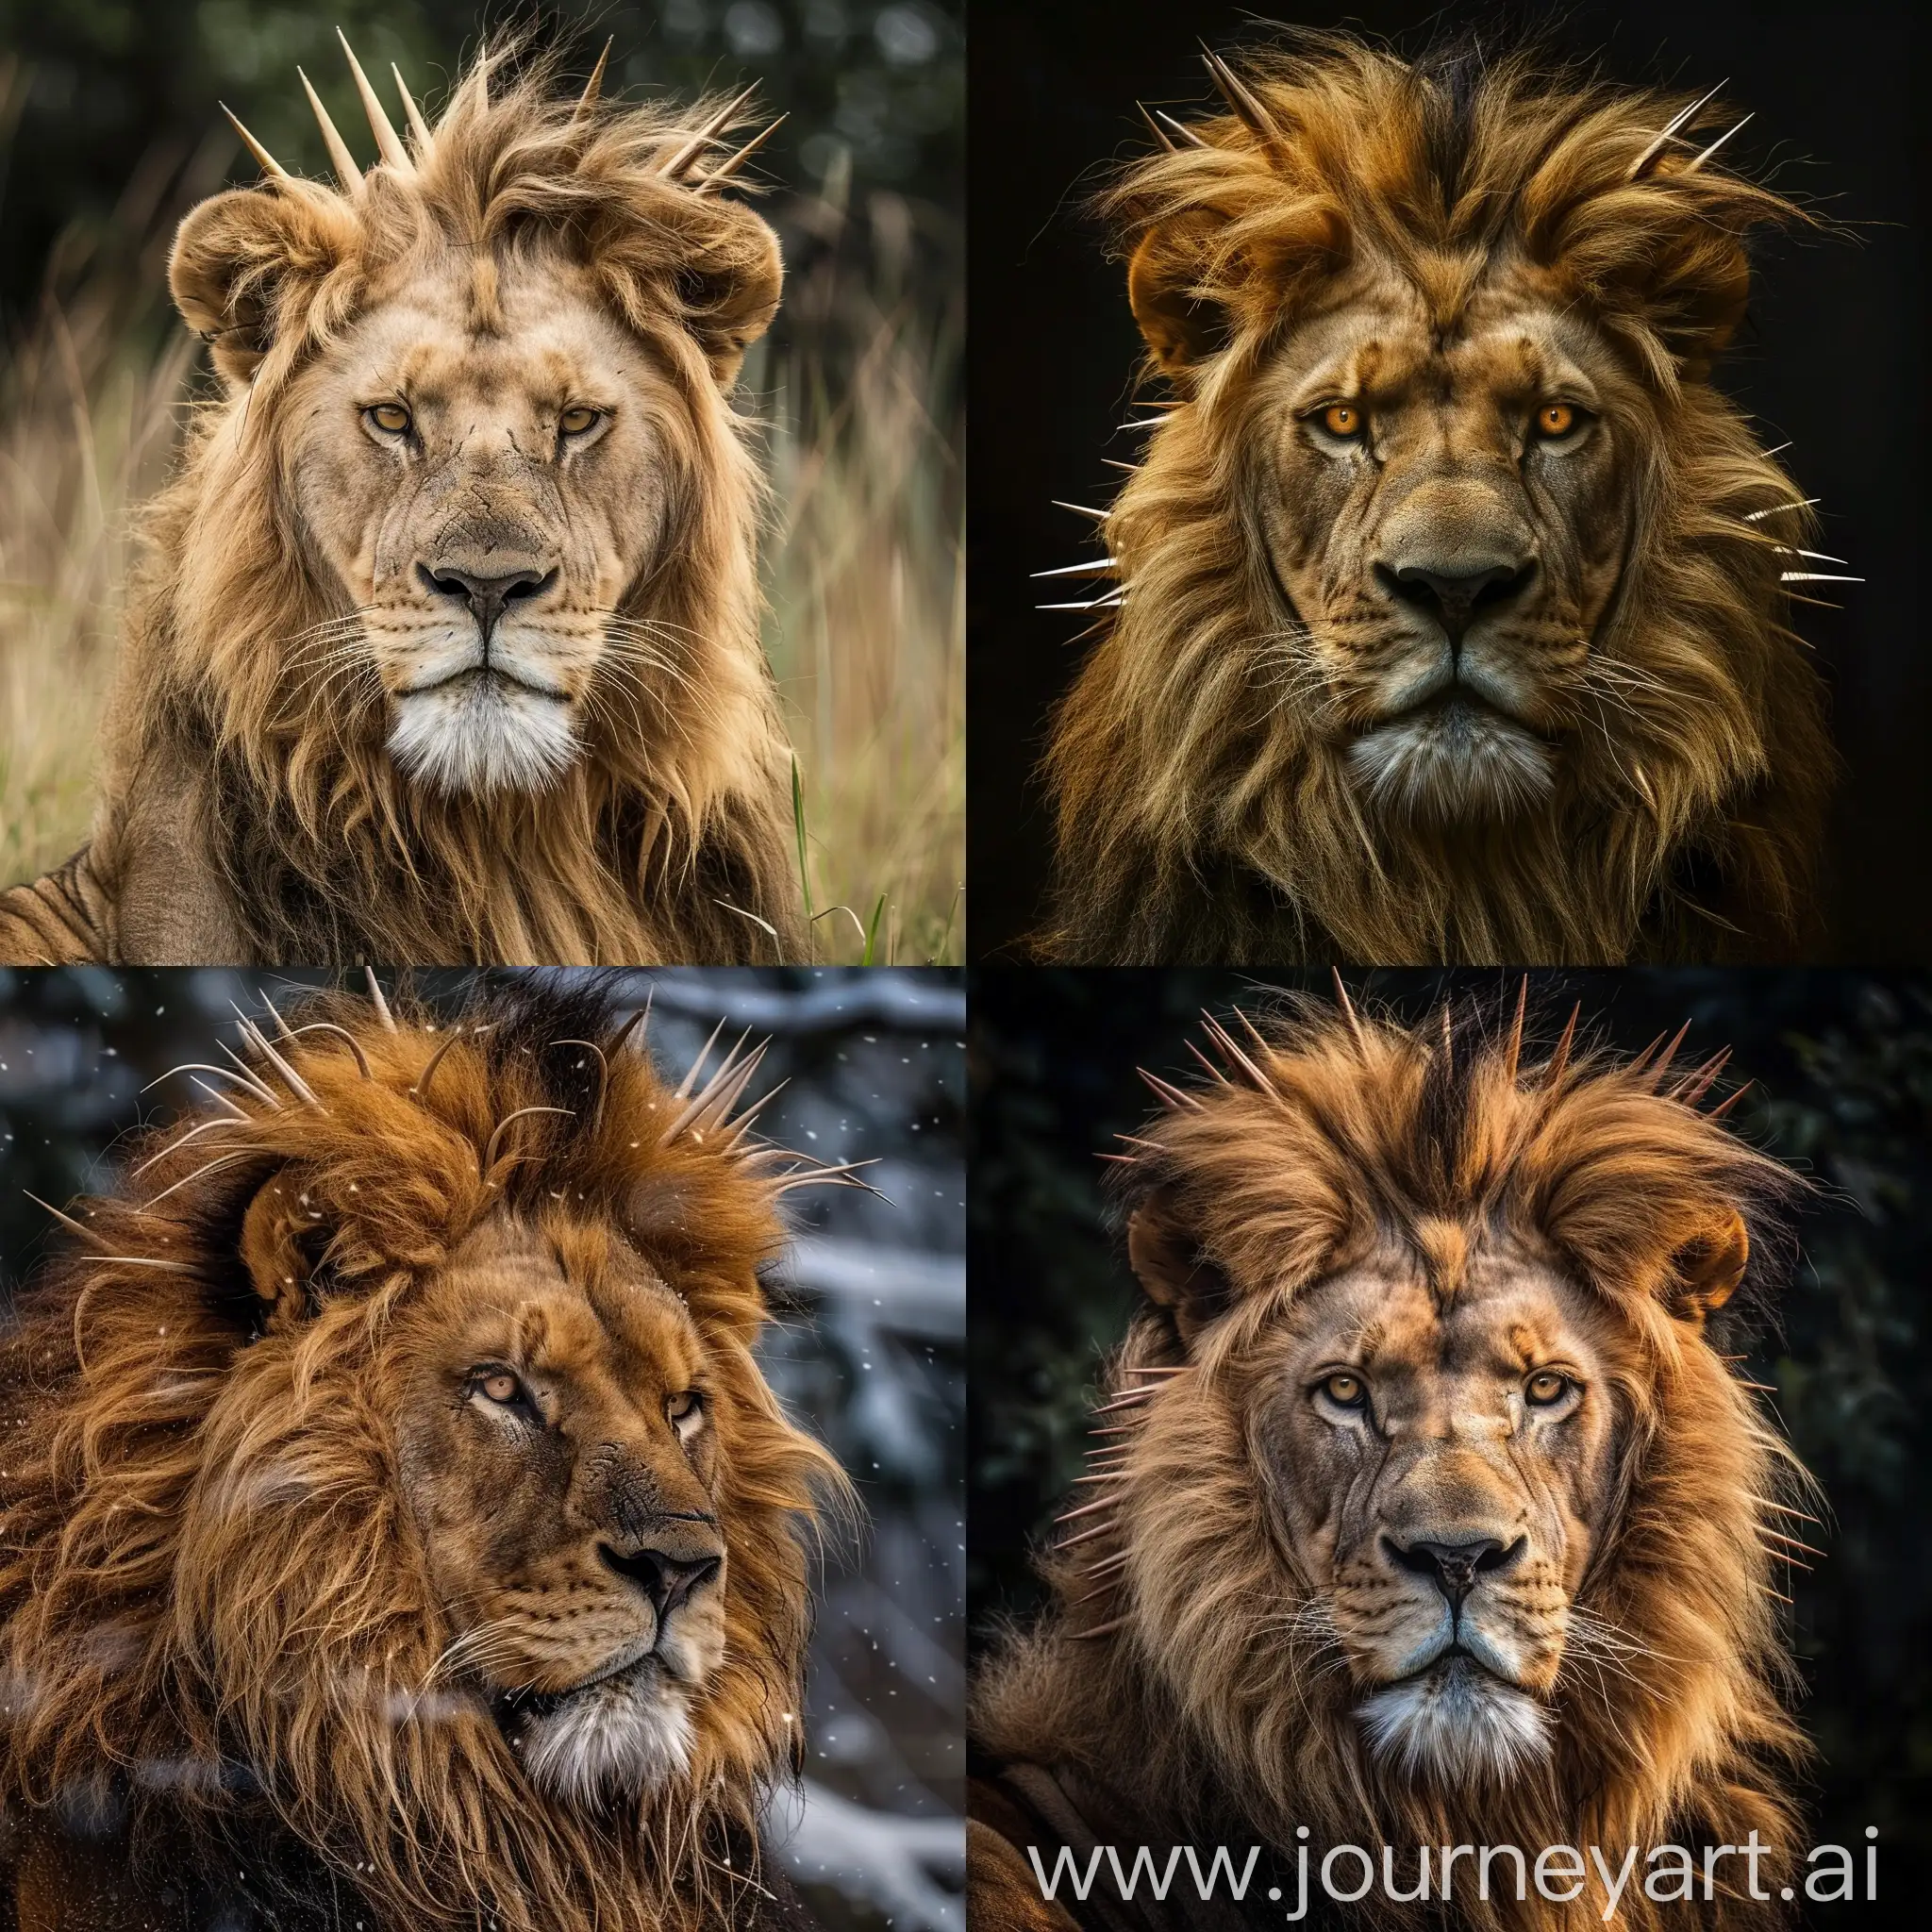 Majestic-Lion-with-Striking-Hair-Spikes